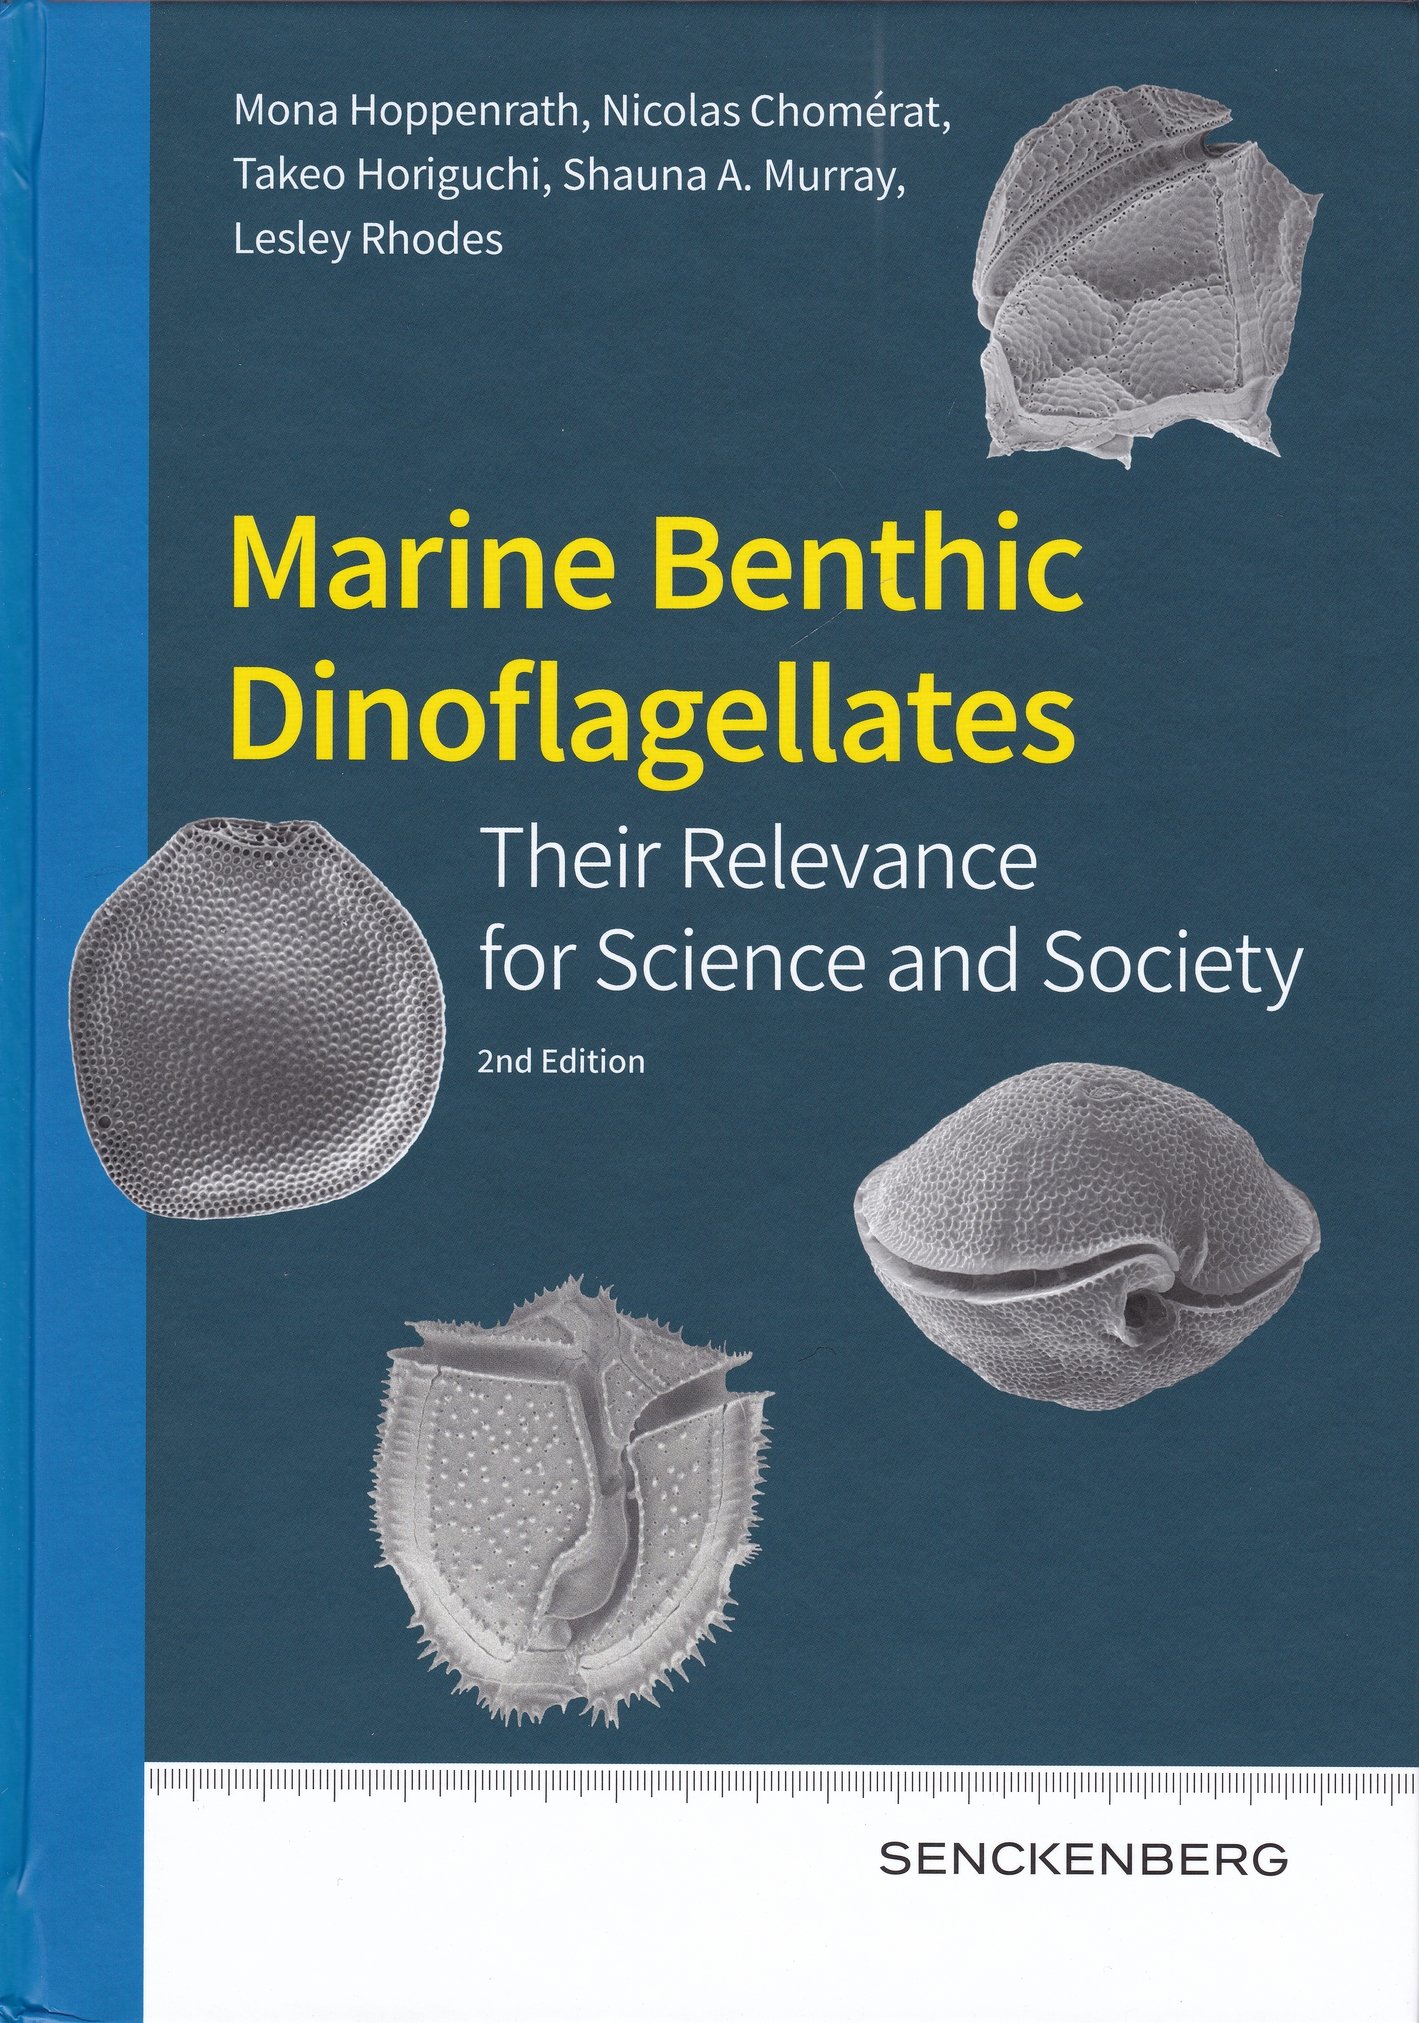 Marine Benthic Dinoflagellates - Their Relevance for Science and Society (Rippl-Rónai Múzeum CC BY-NC-ND)